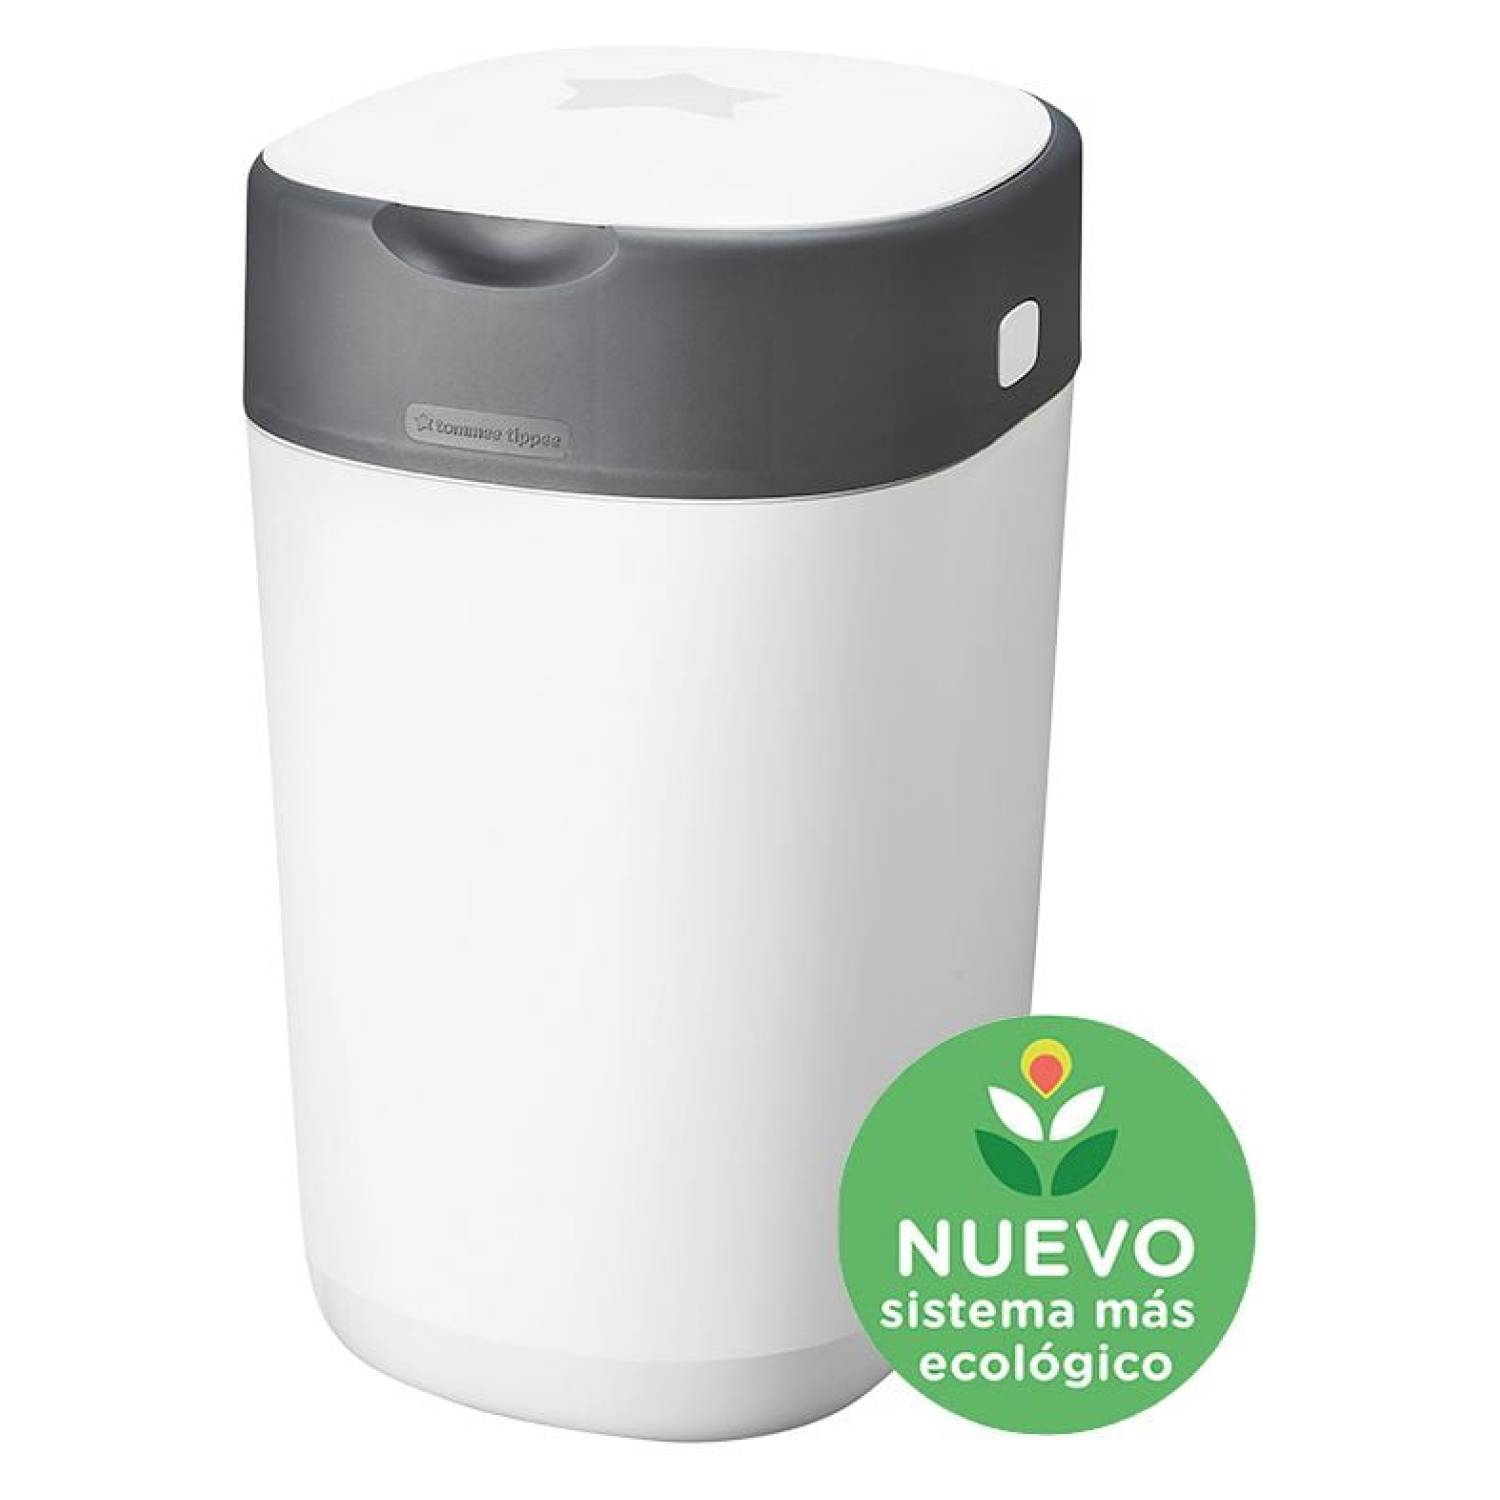 Tommee Tippee Contenedor Pañales Sangenic Twist & Click